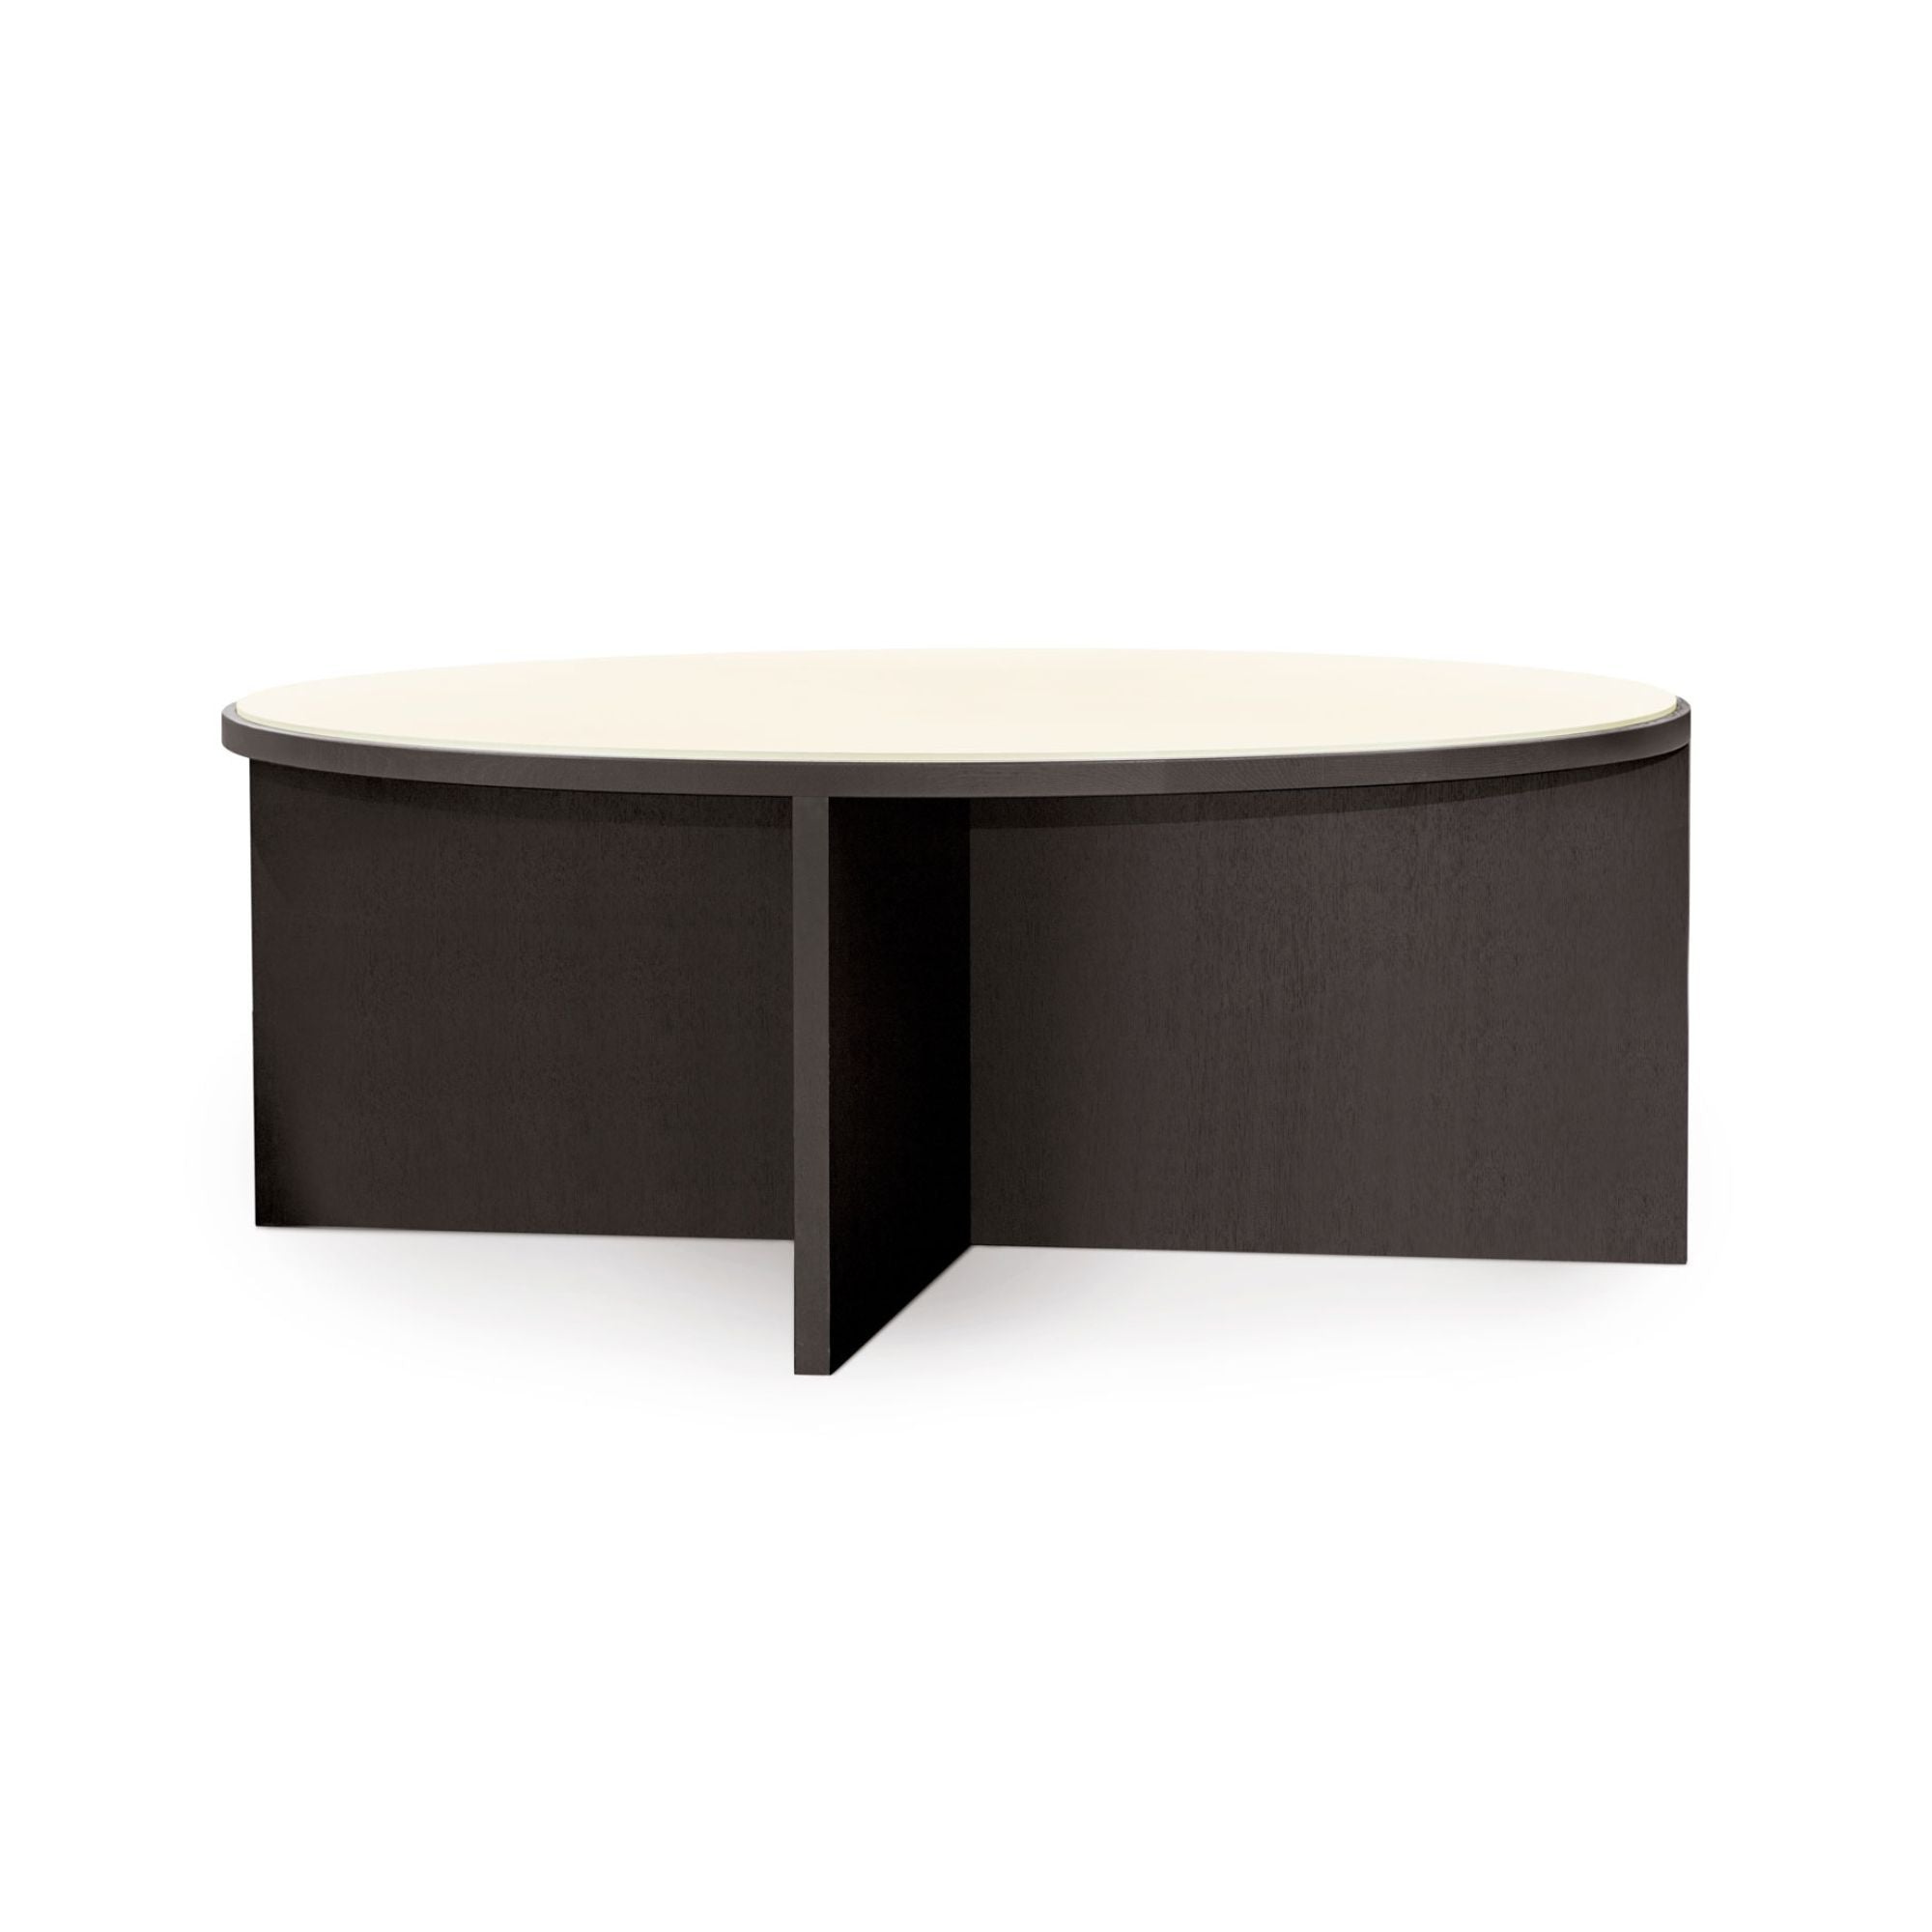 Cici L Dining Table